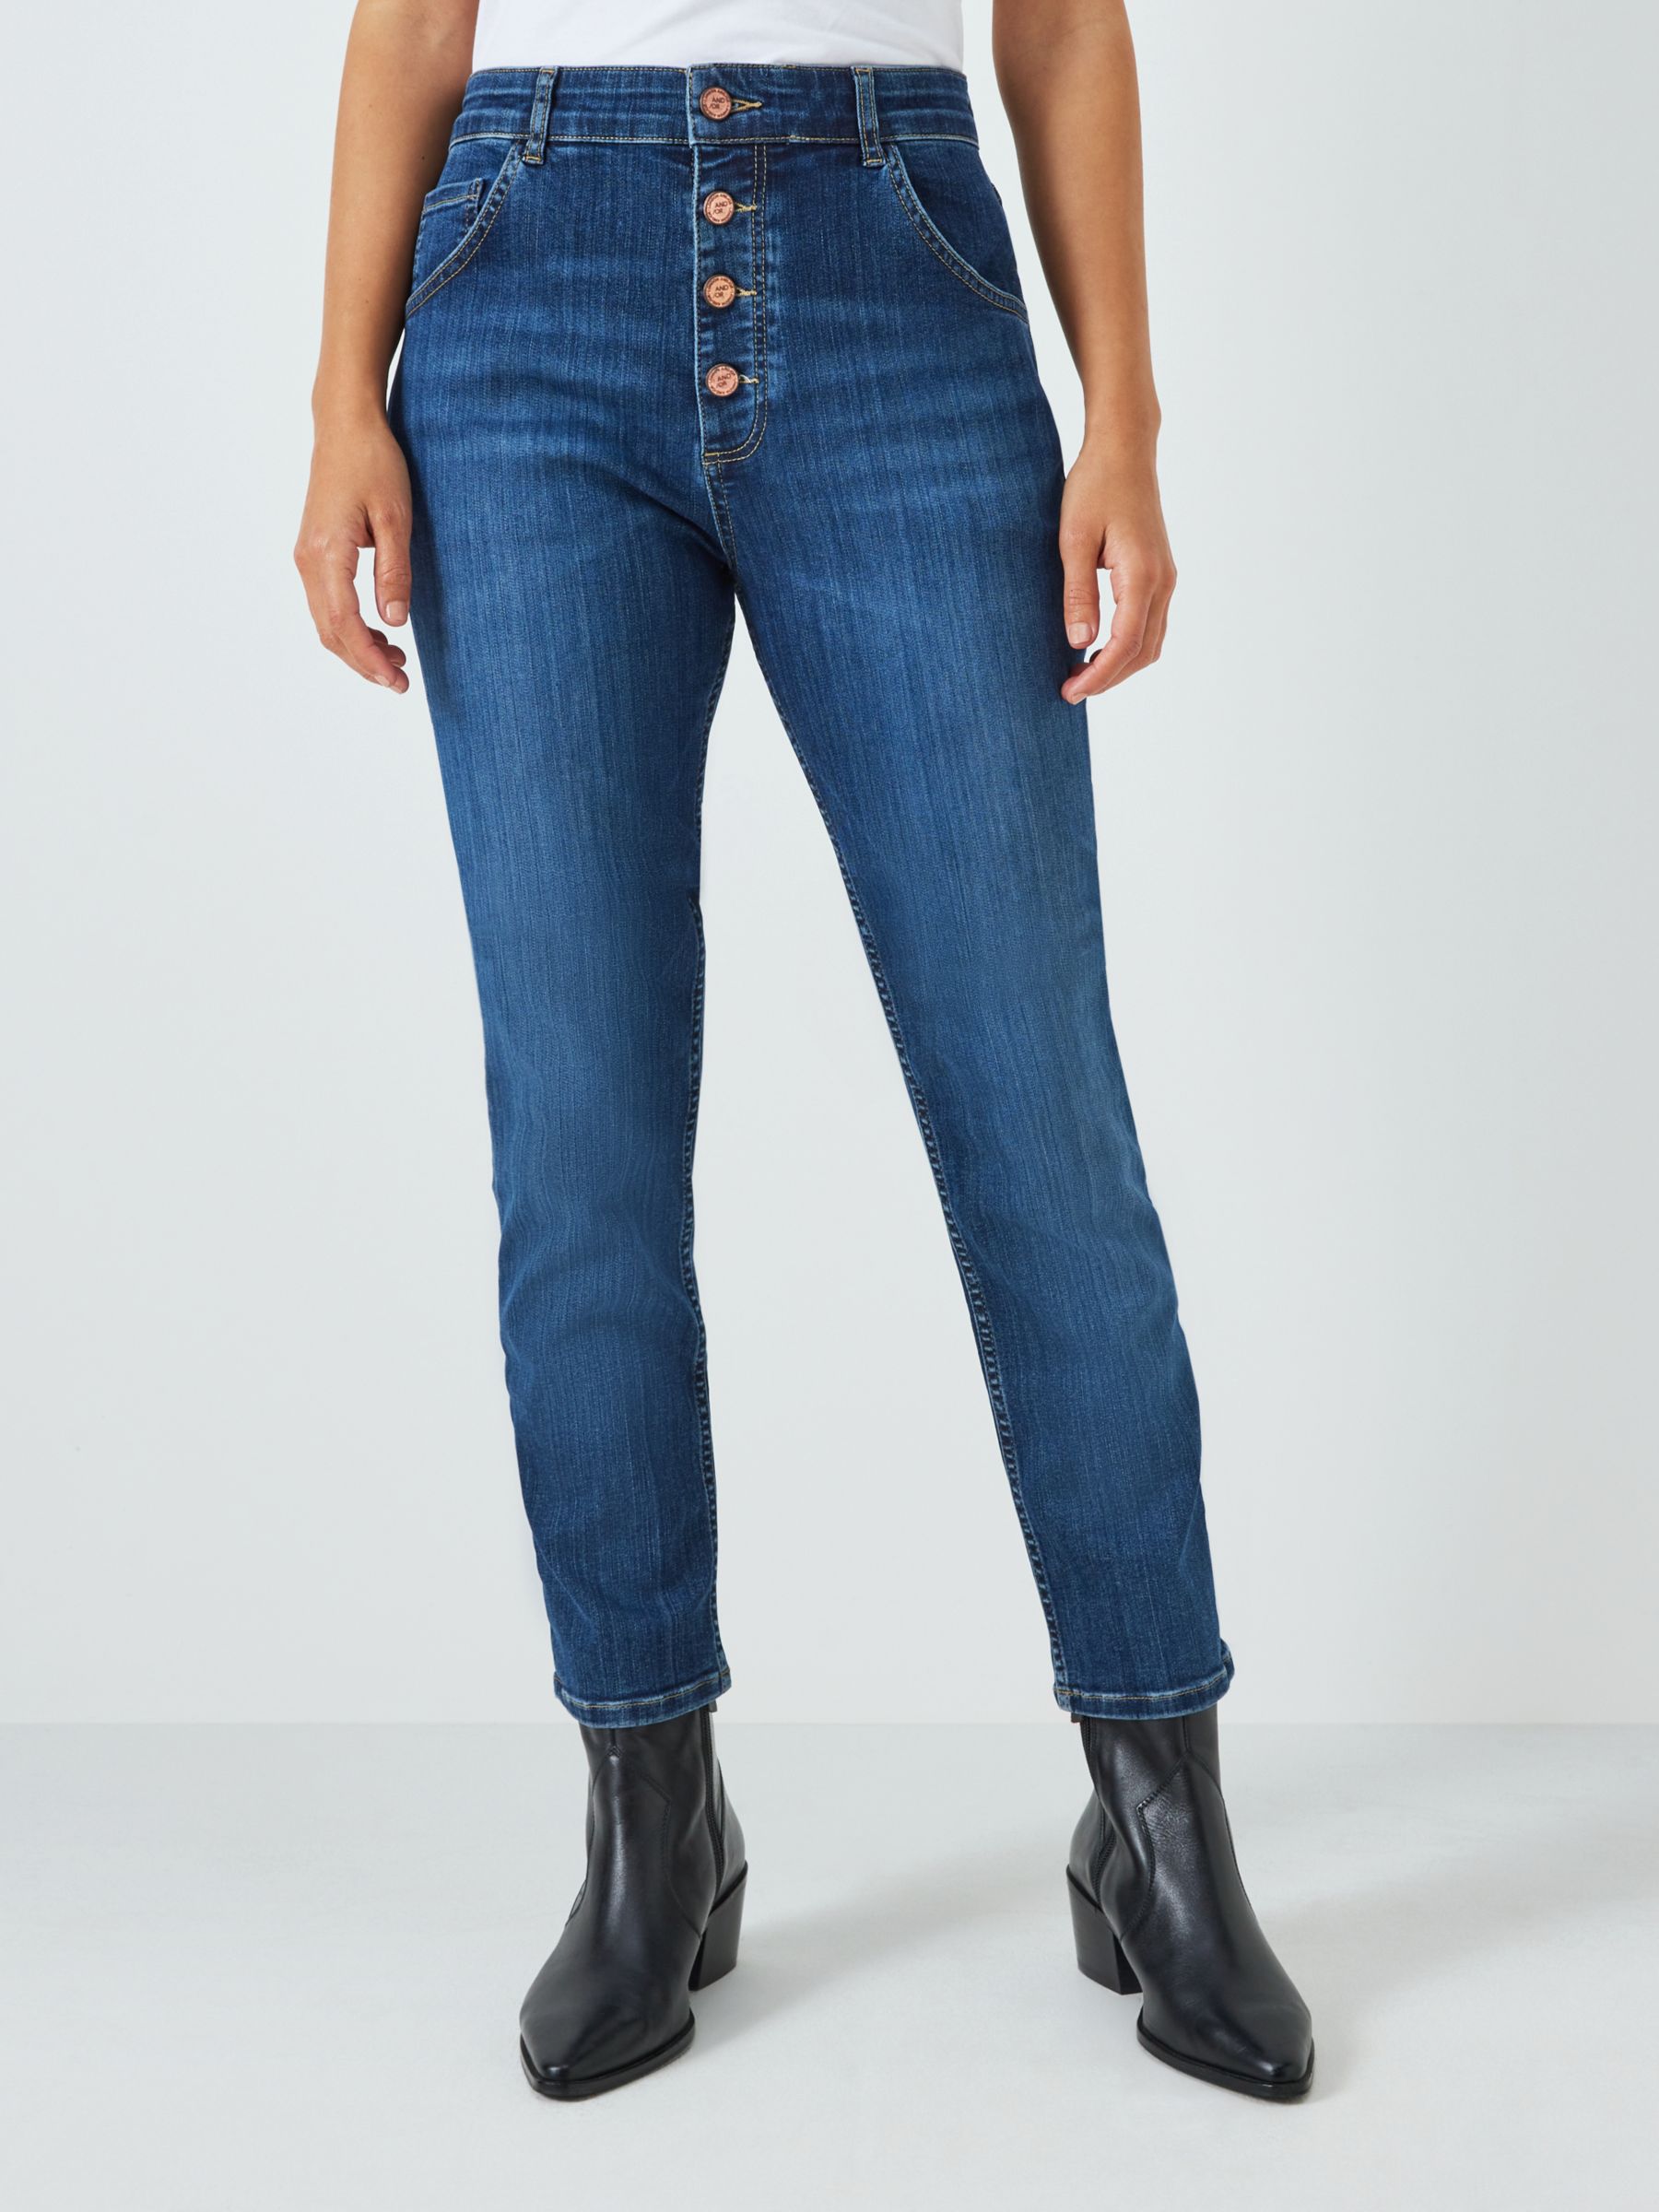 AND/OR Venice Beach Boyfriend Jeans, Vintage Perfected at John Lewis &  Partners